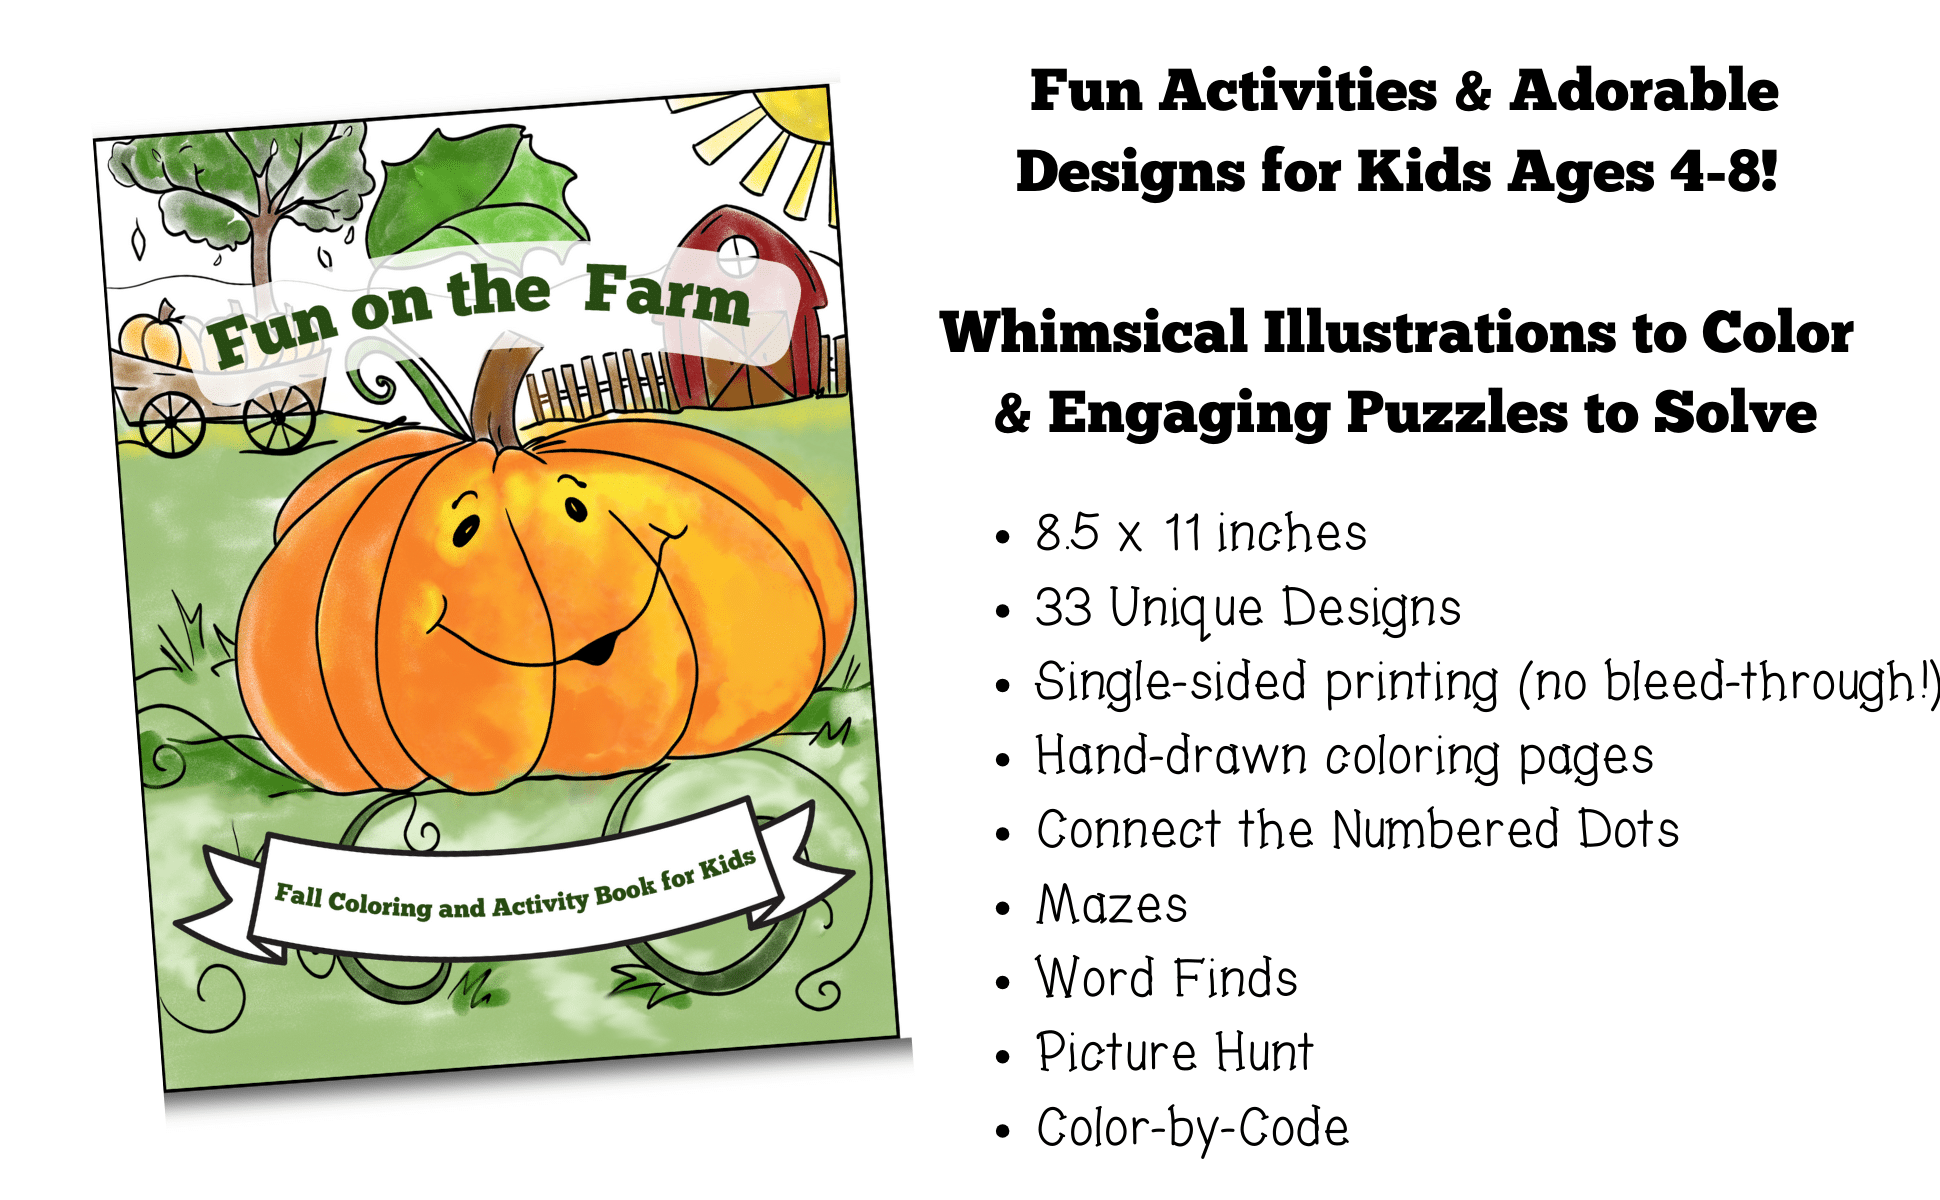 Cover of fall coloring book with description